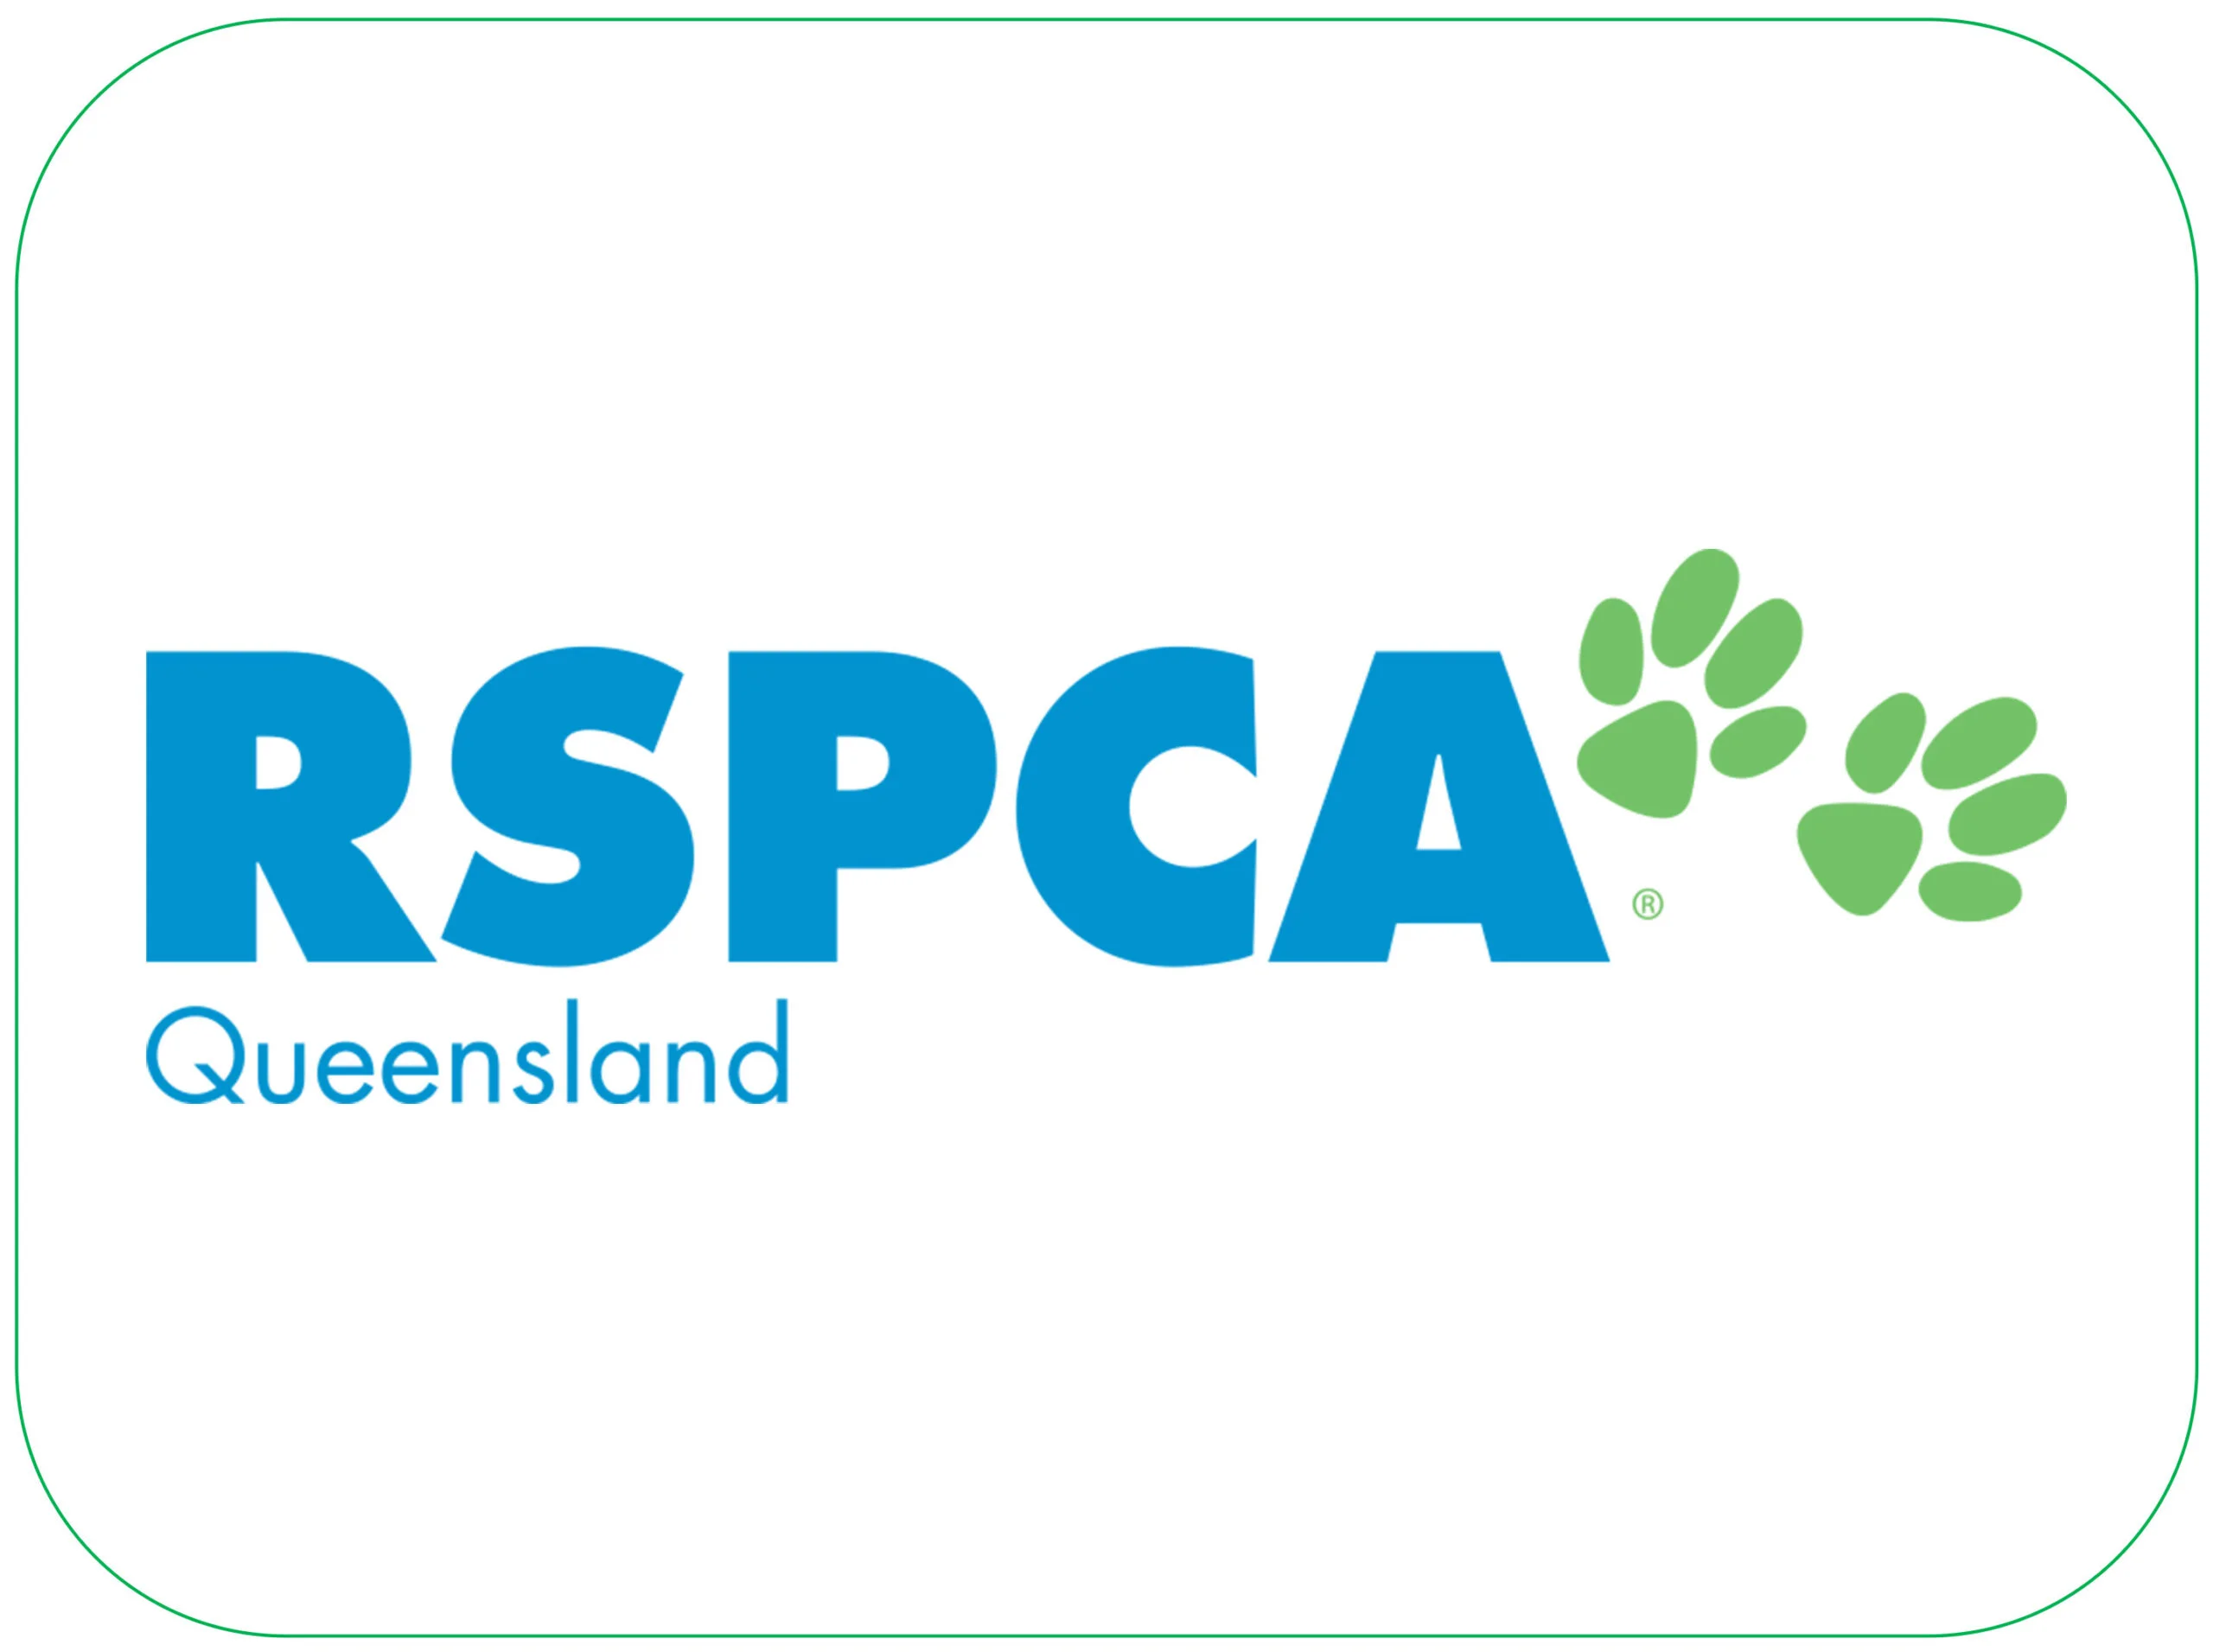 Recognised Workplaces - RSPCA Queensland